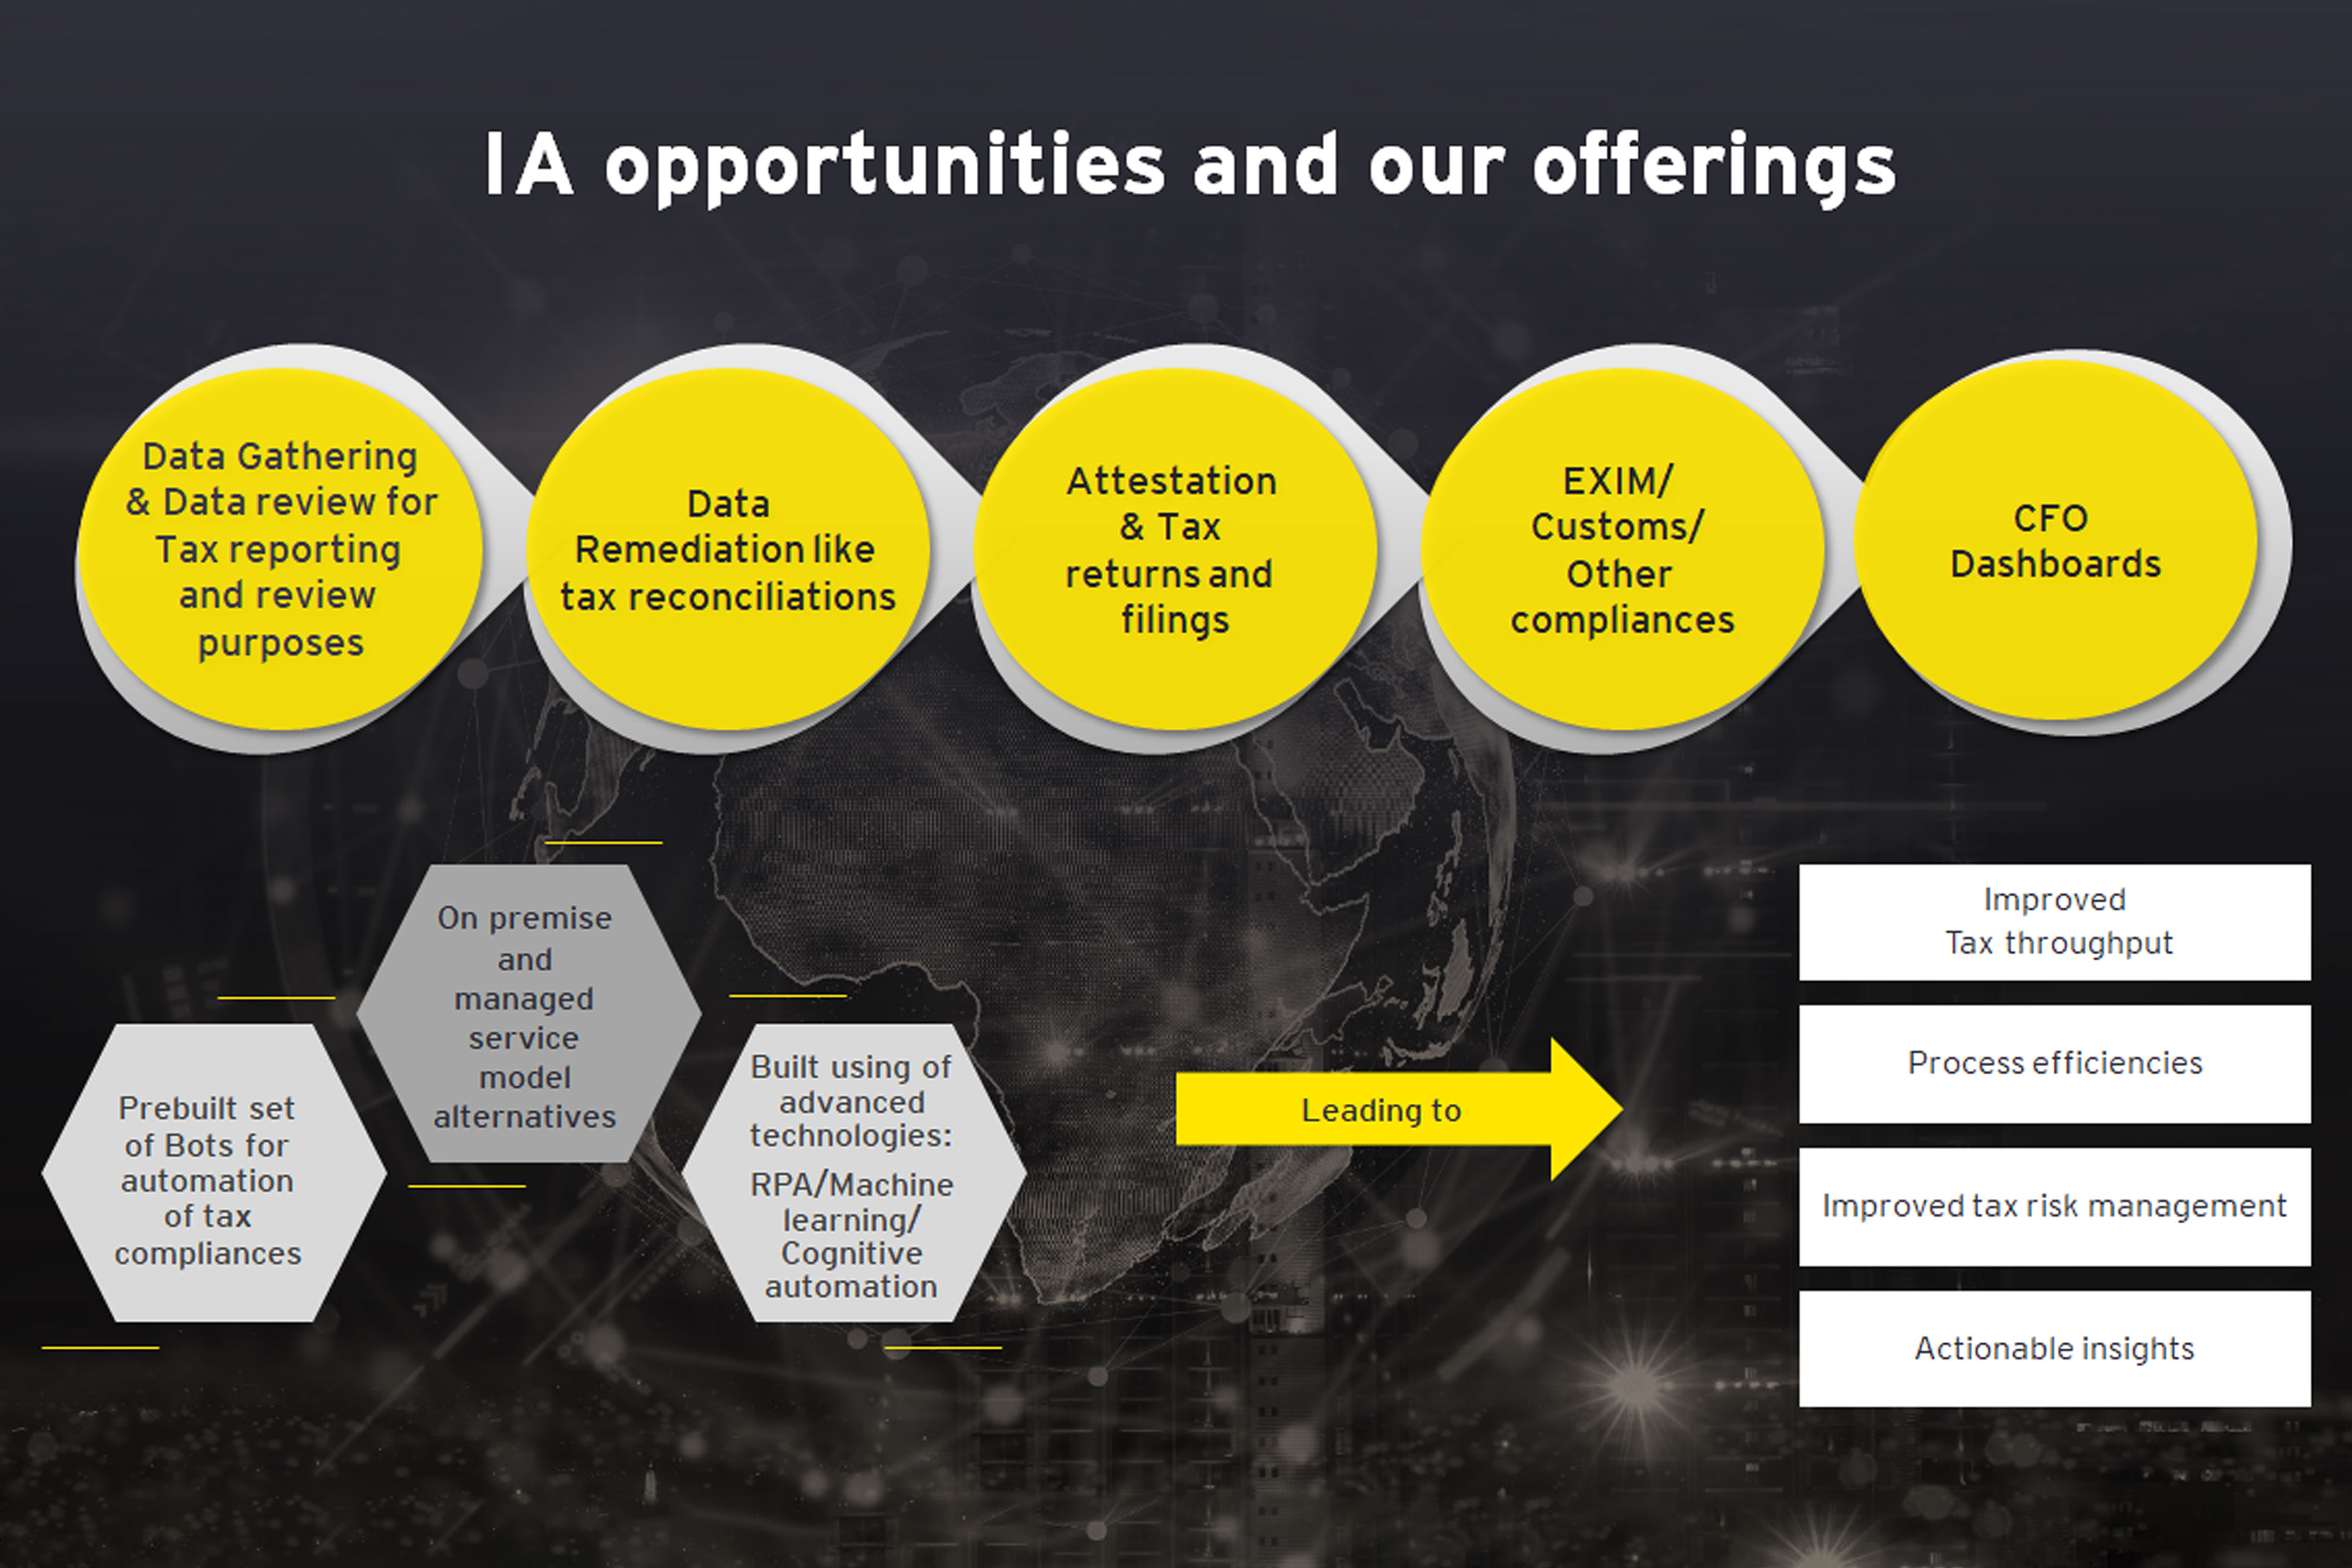 IA Opportunities and offerings